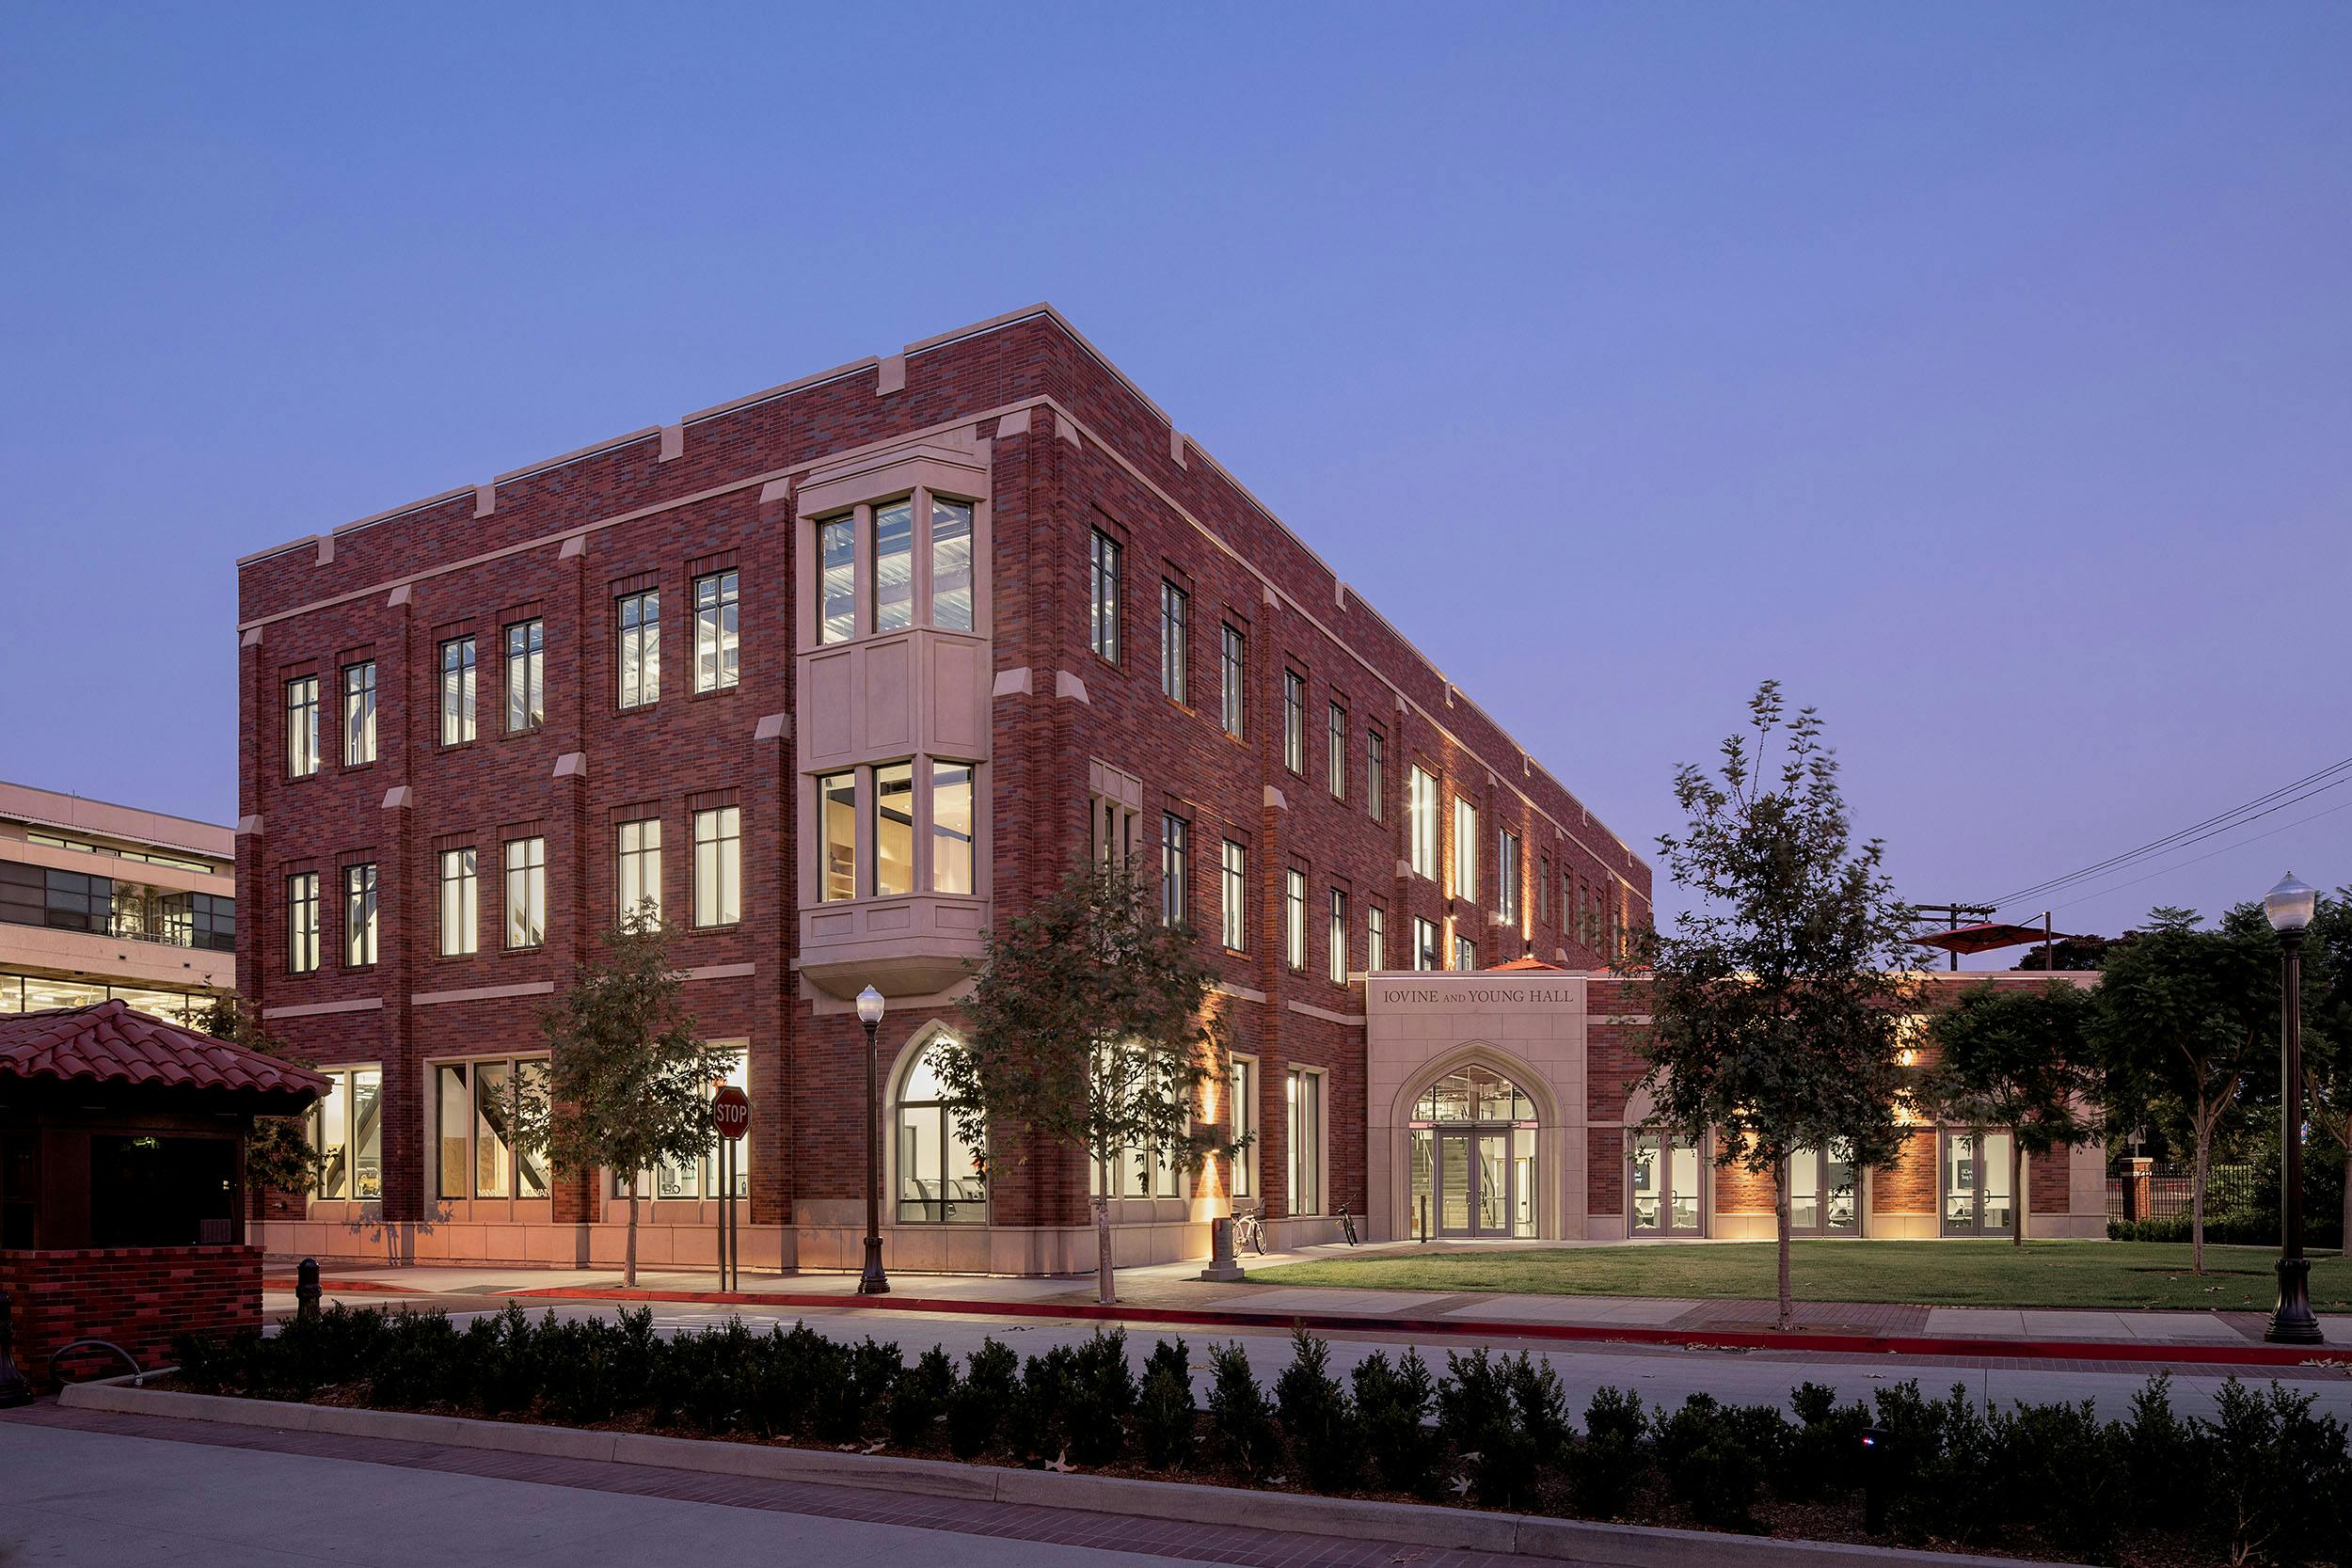 A red brick building with lights on in the evening